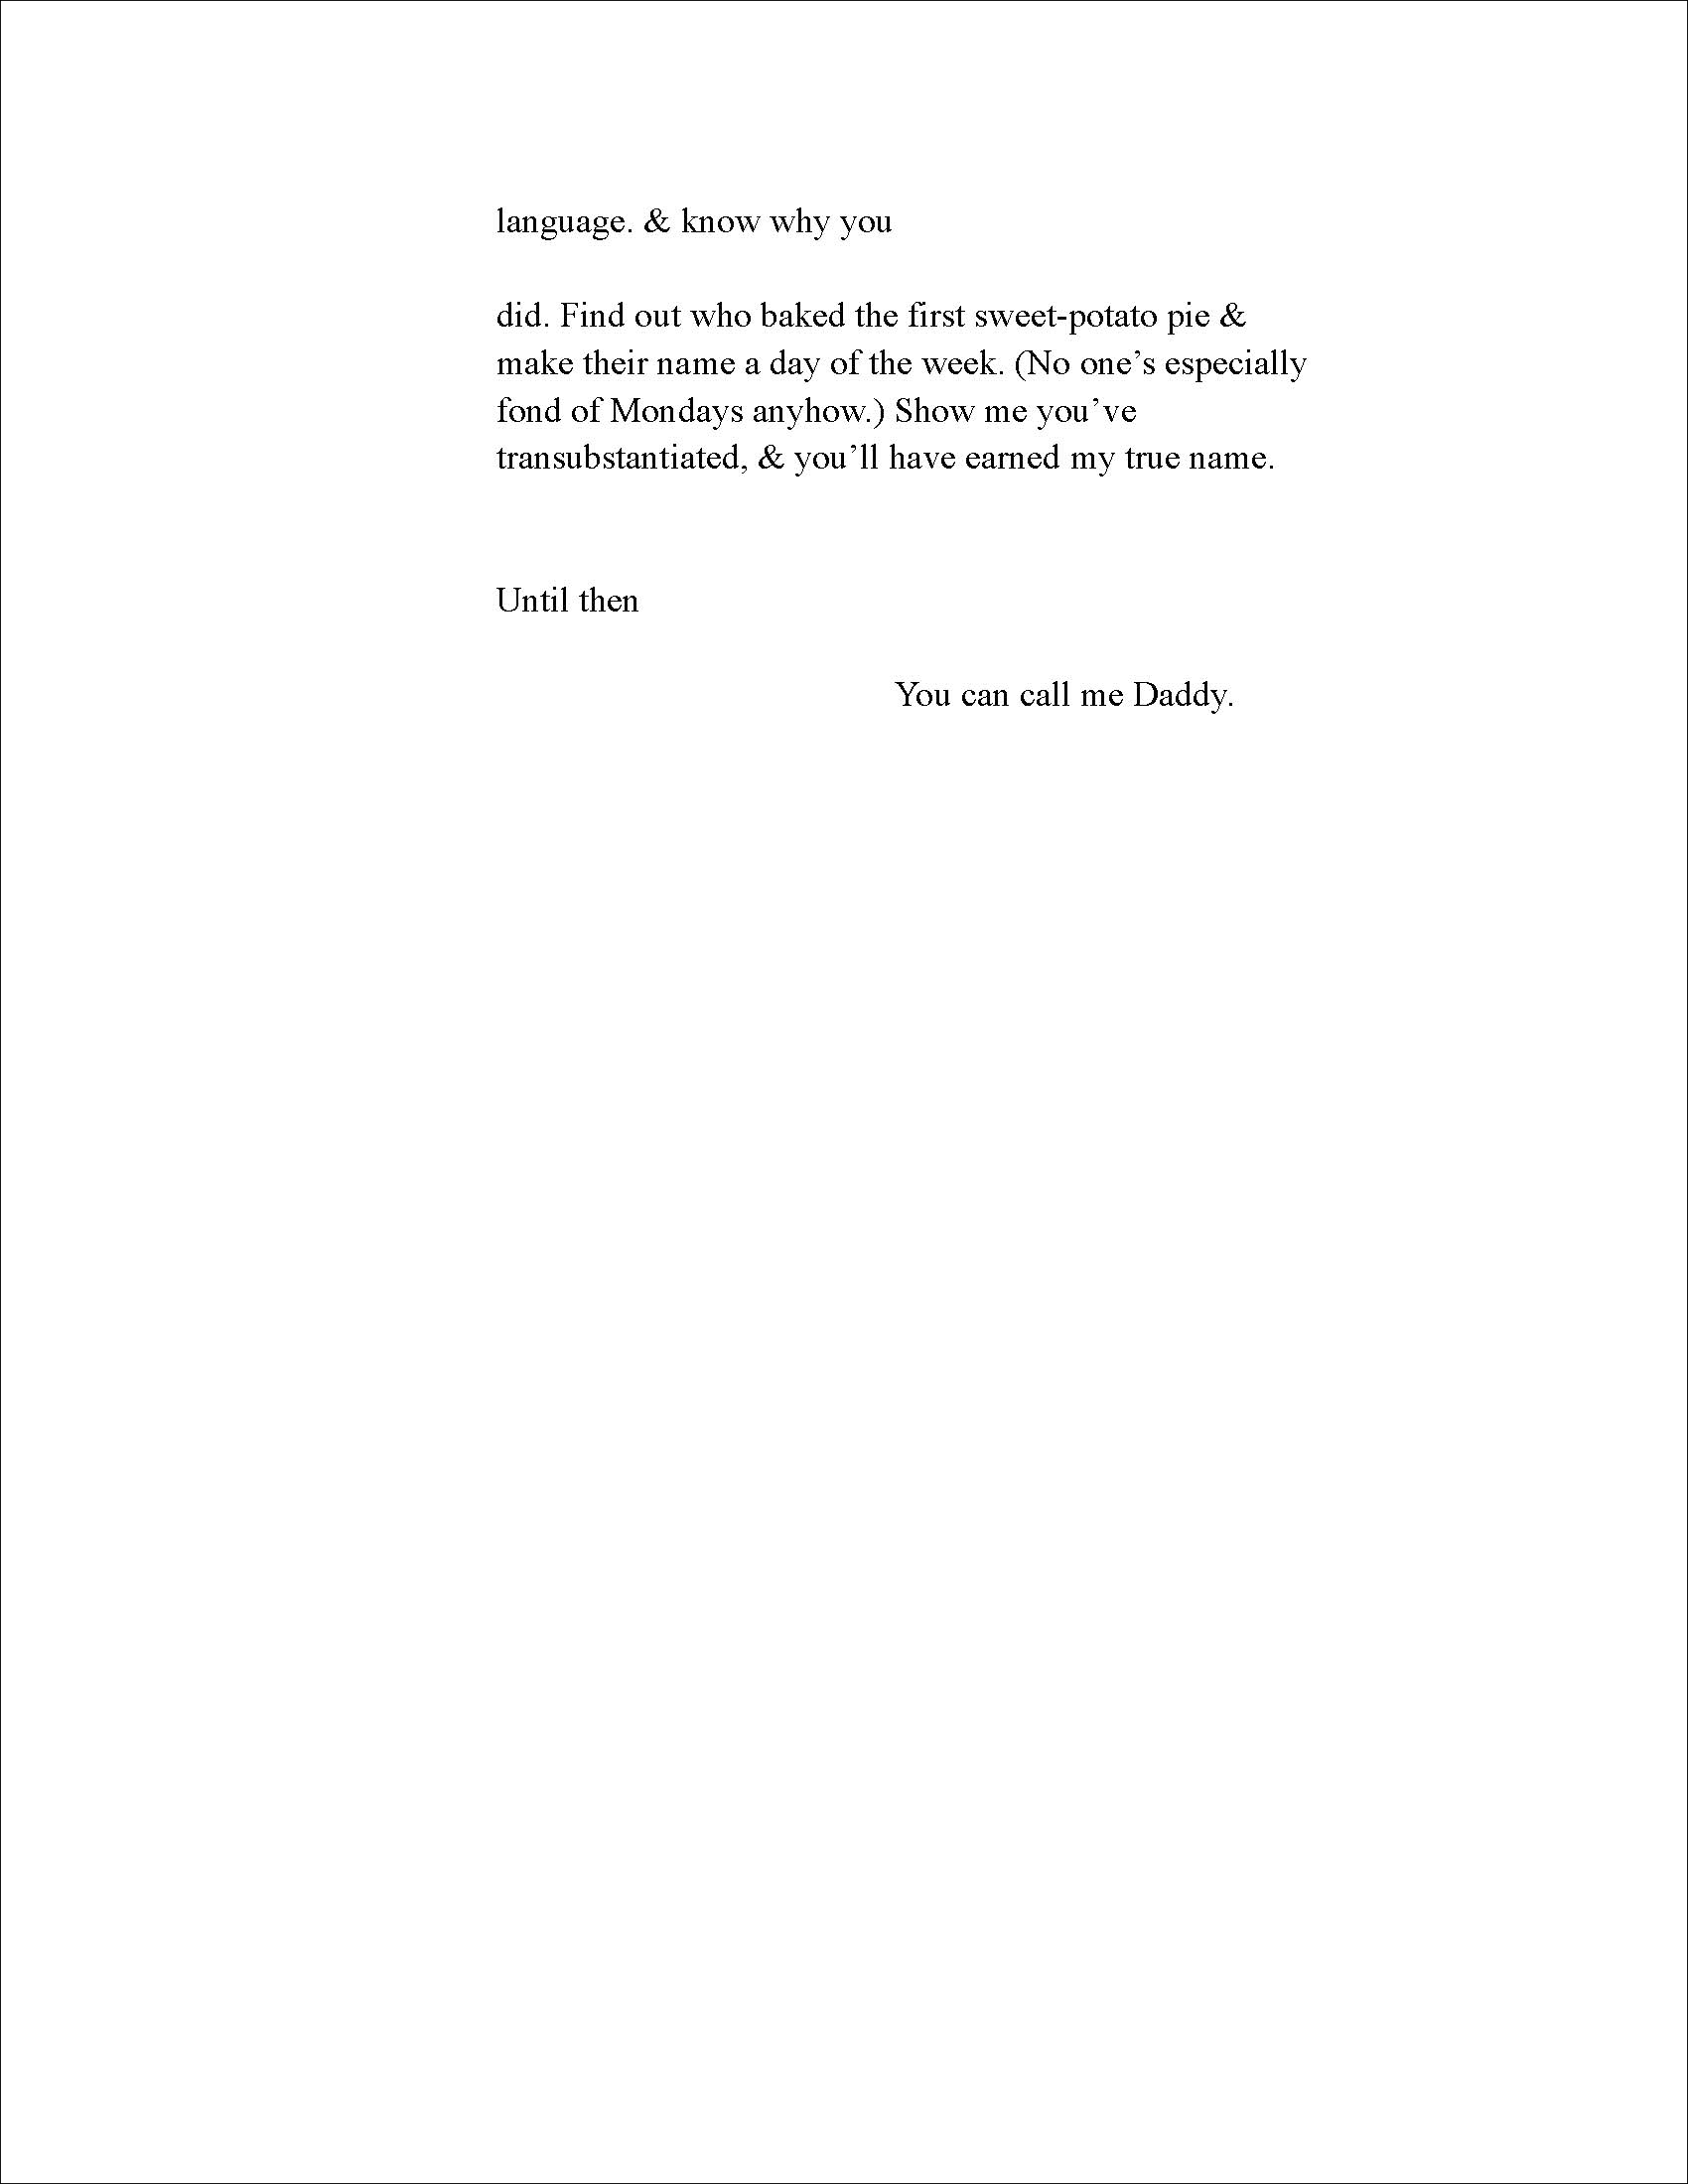 Two Poems_Jubi Arriola-Headley_Page_5.png